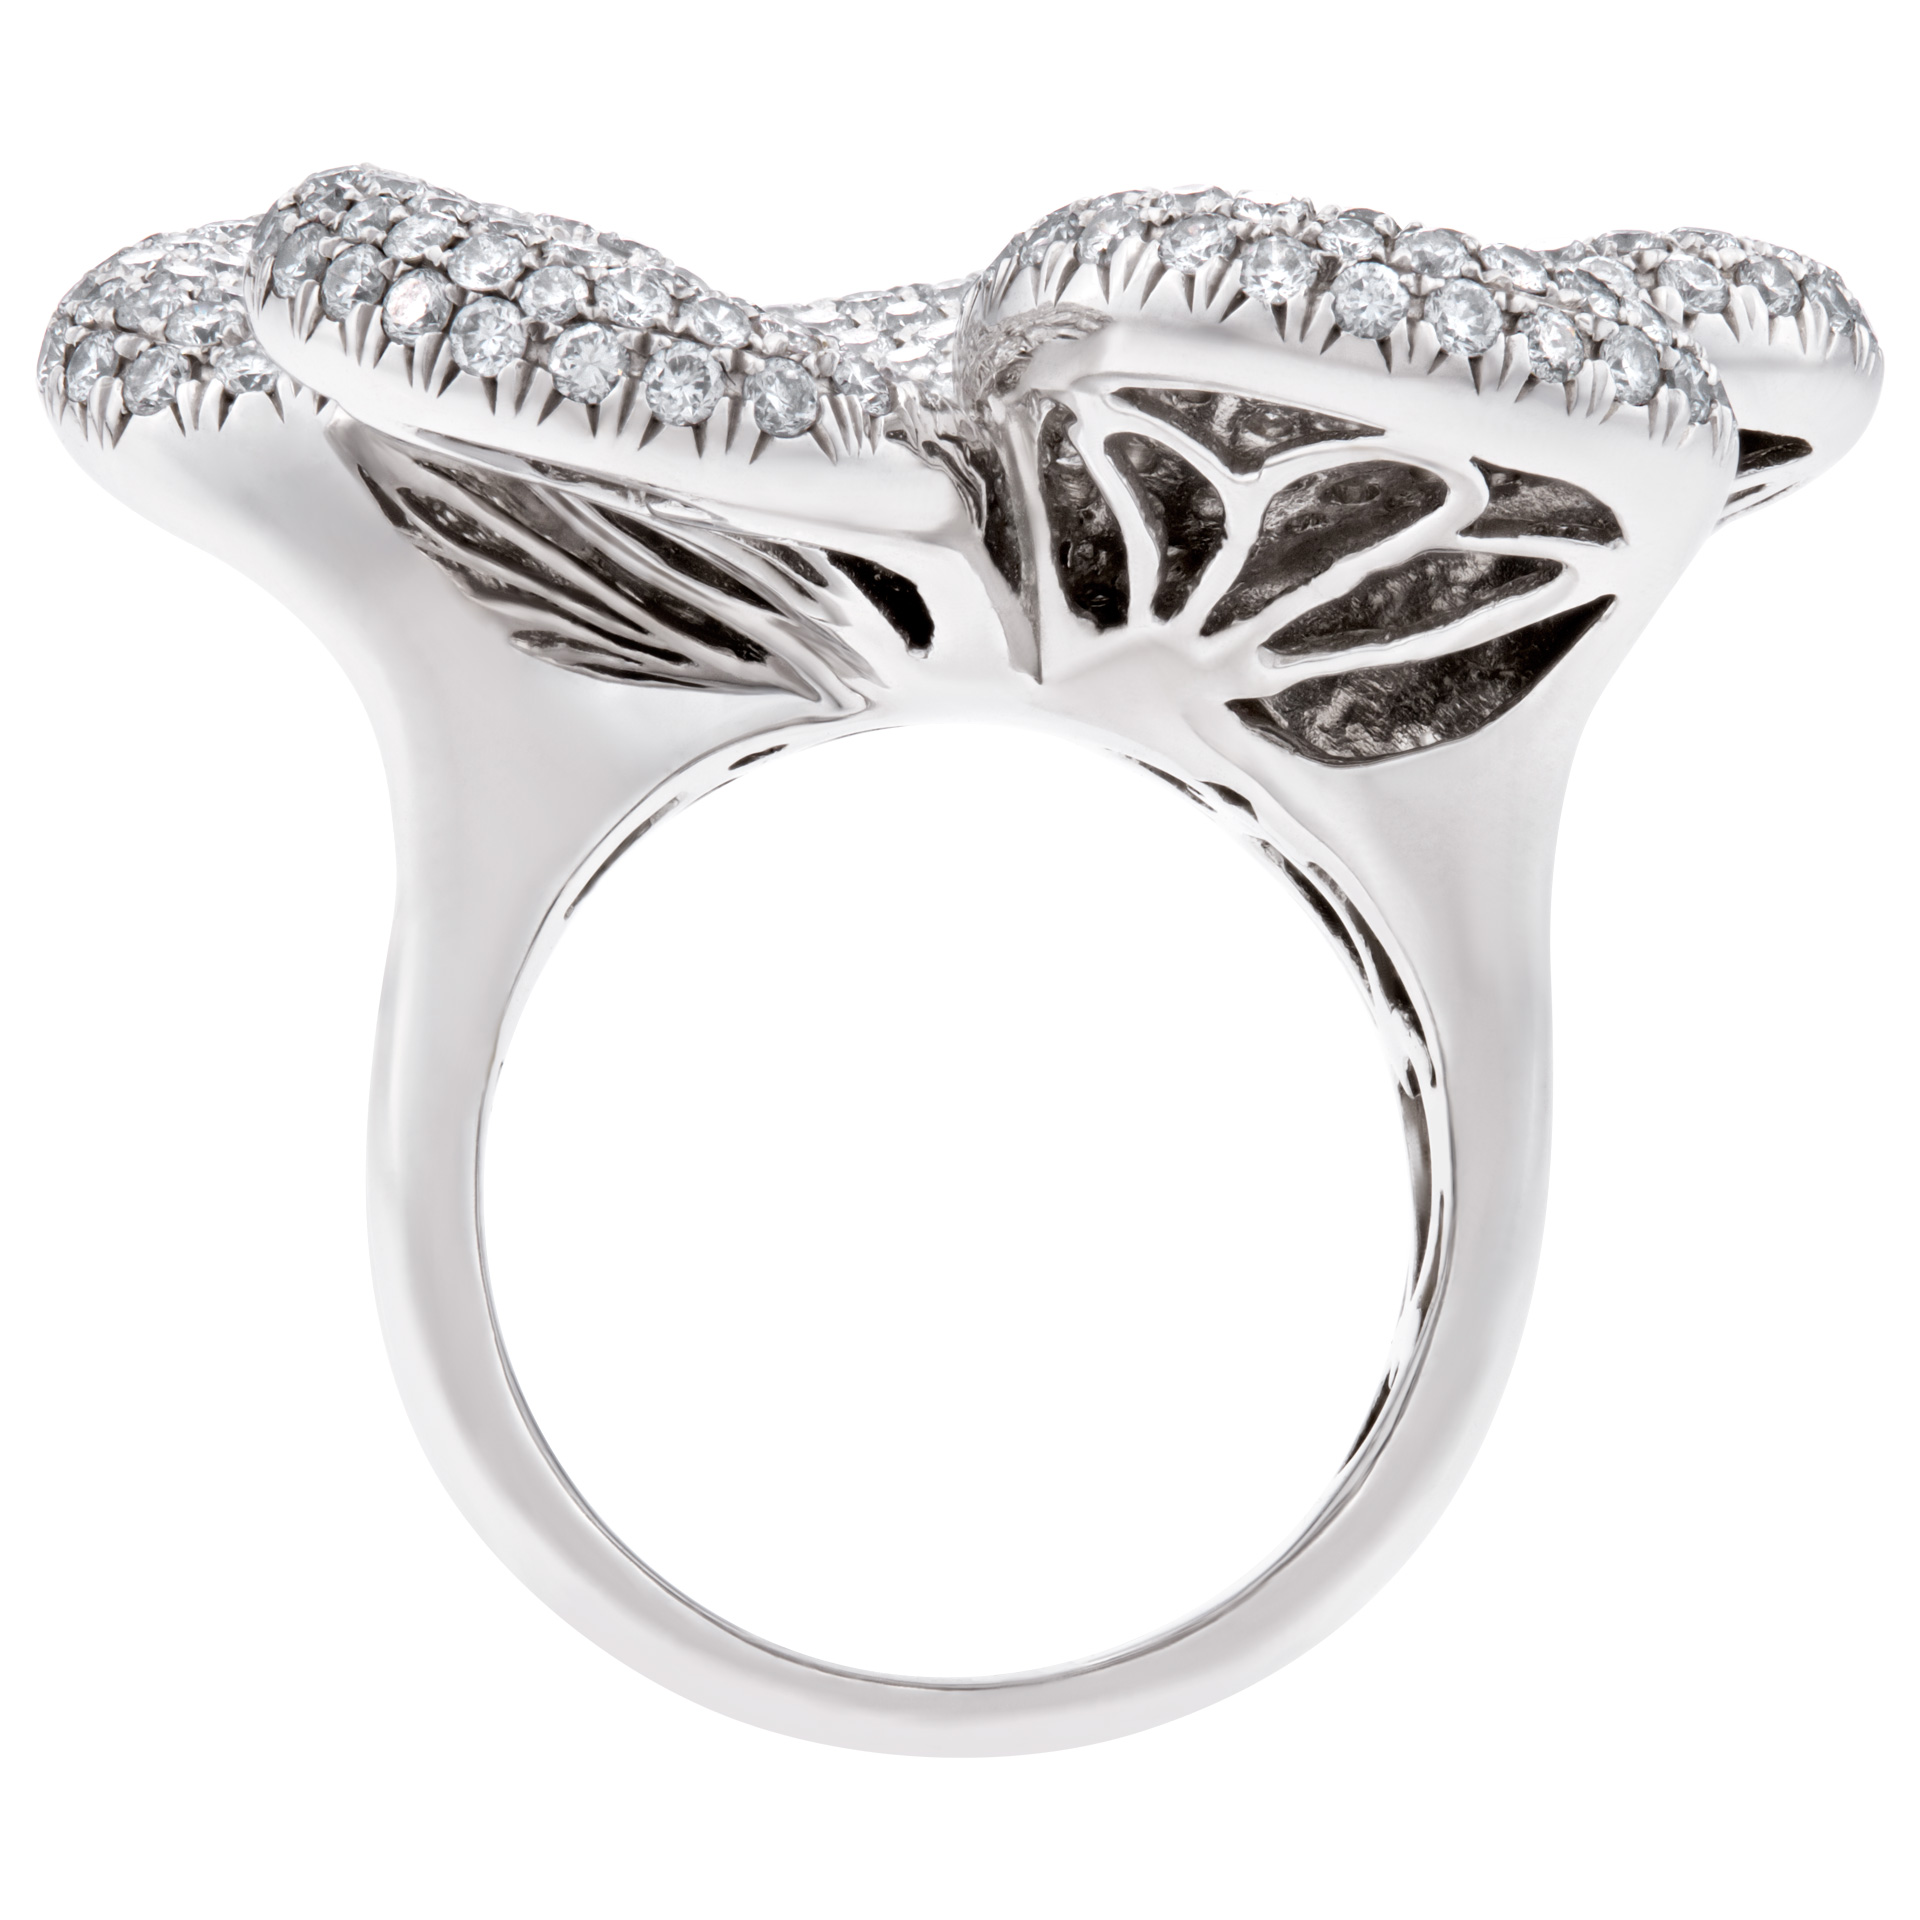 Pave diamond flower ring in 18k white gold w/ approx. 4.92 carats in round white diamonds image 2